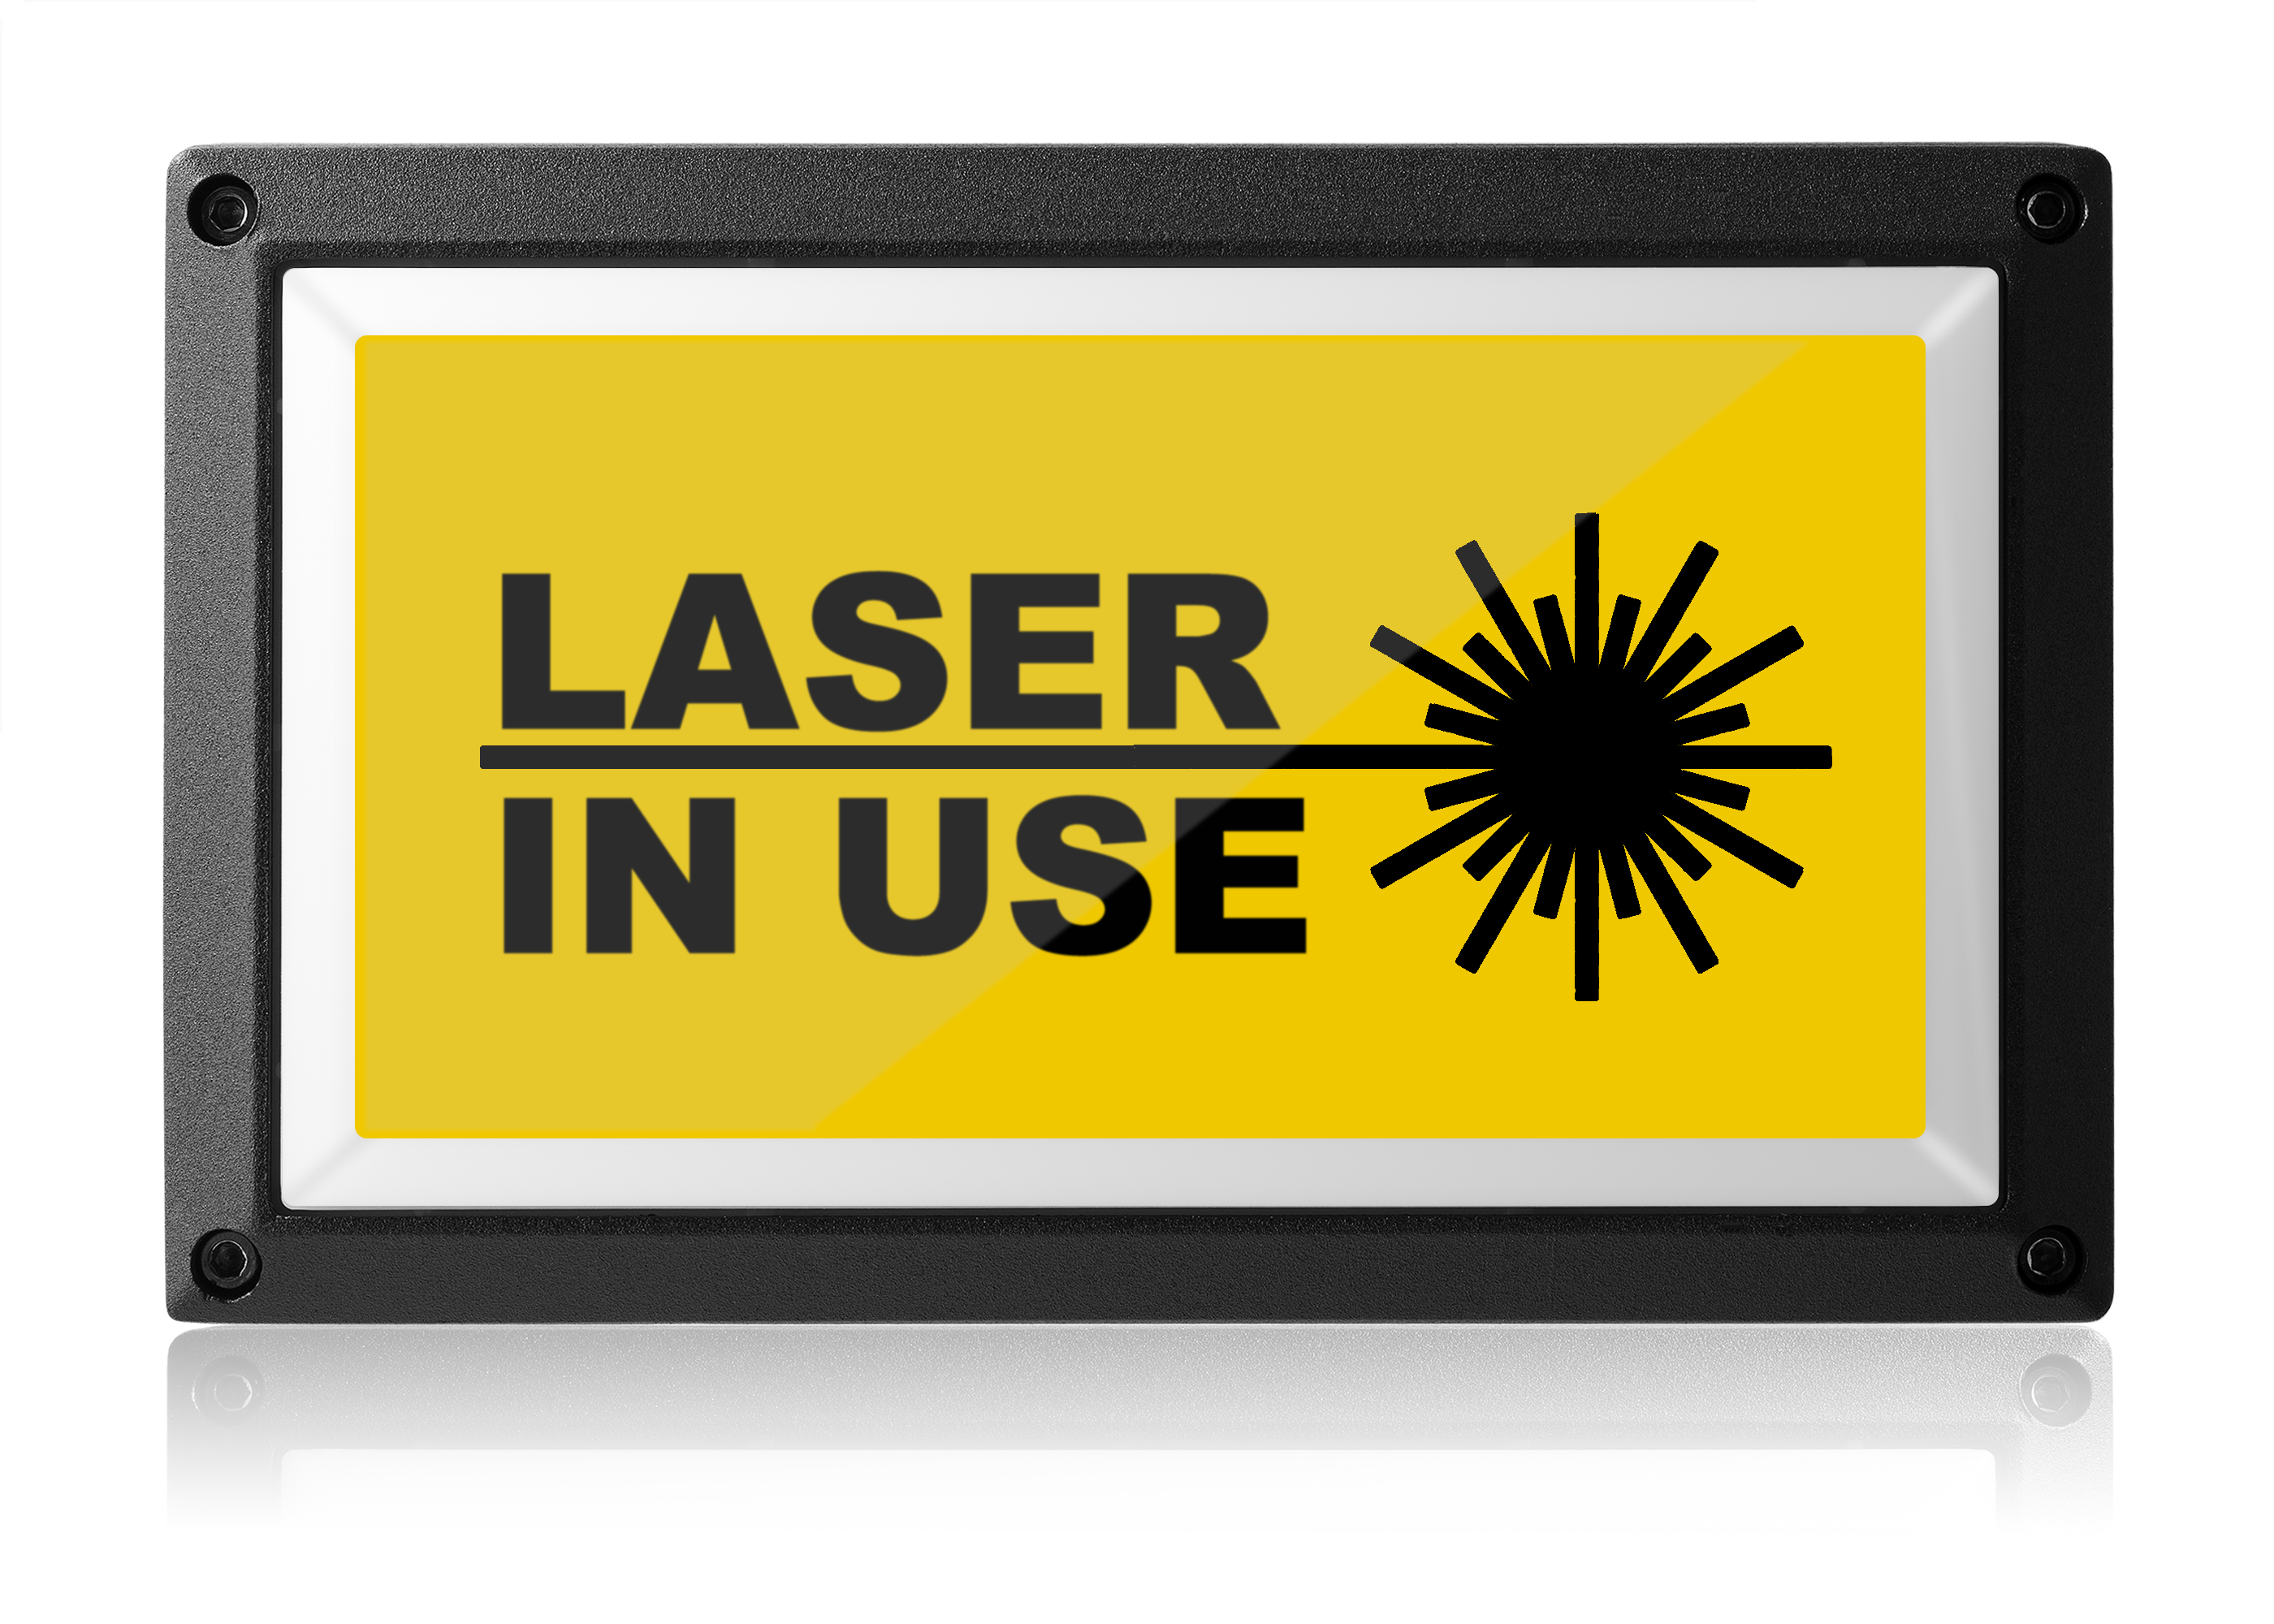 Laser In Use Light - Yellow ISO- Rekall Dynamics LED Sign